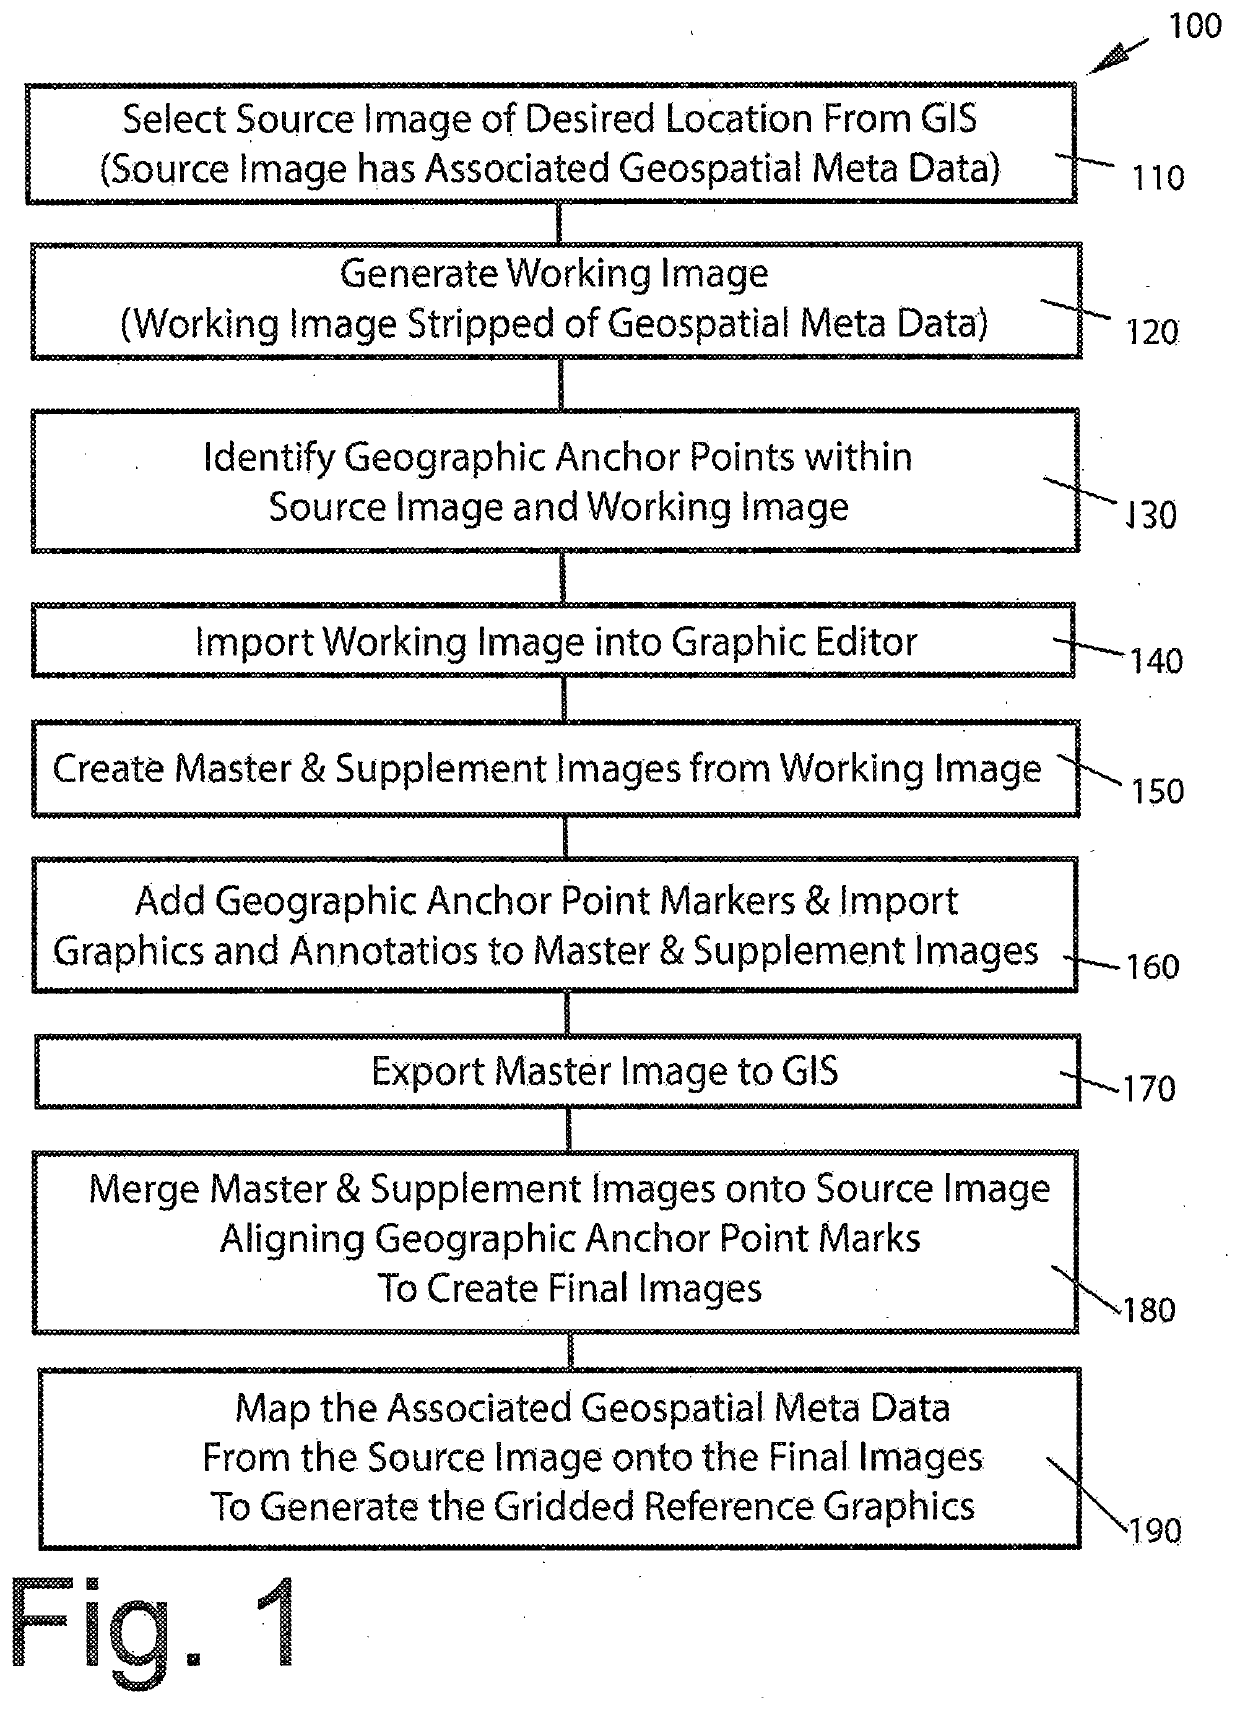 Method for creating gridded reference graphics